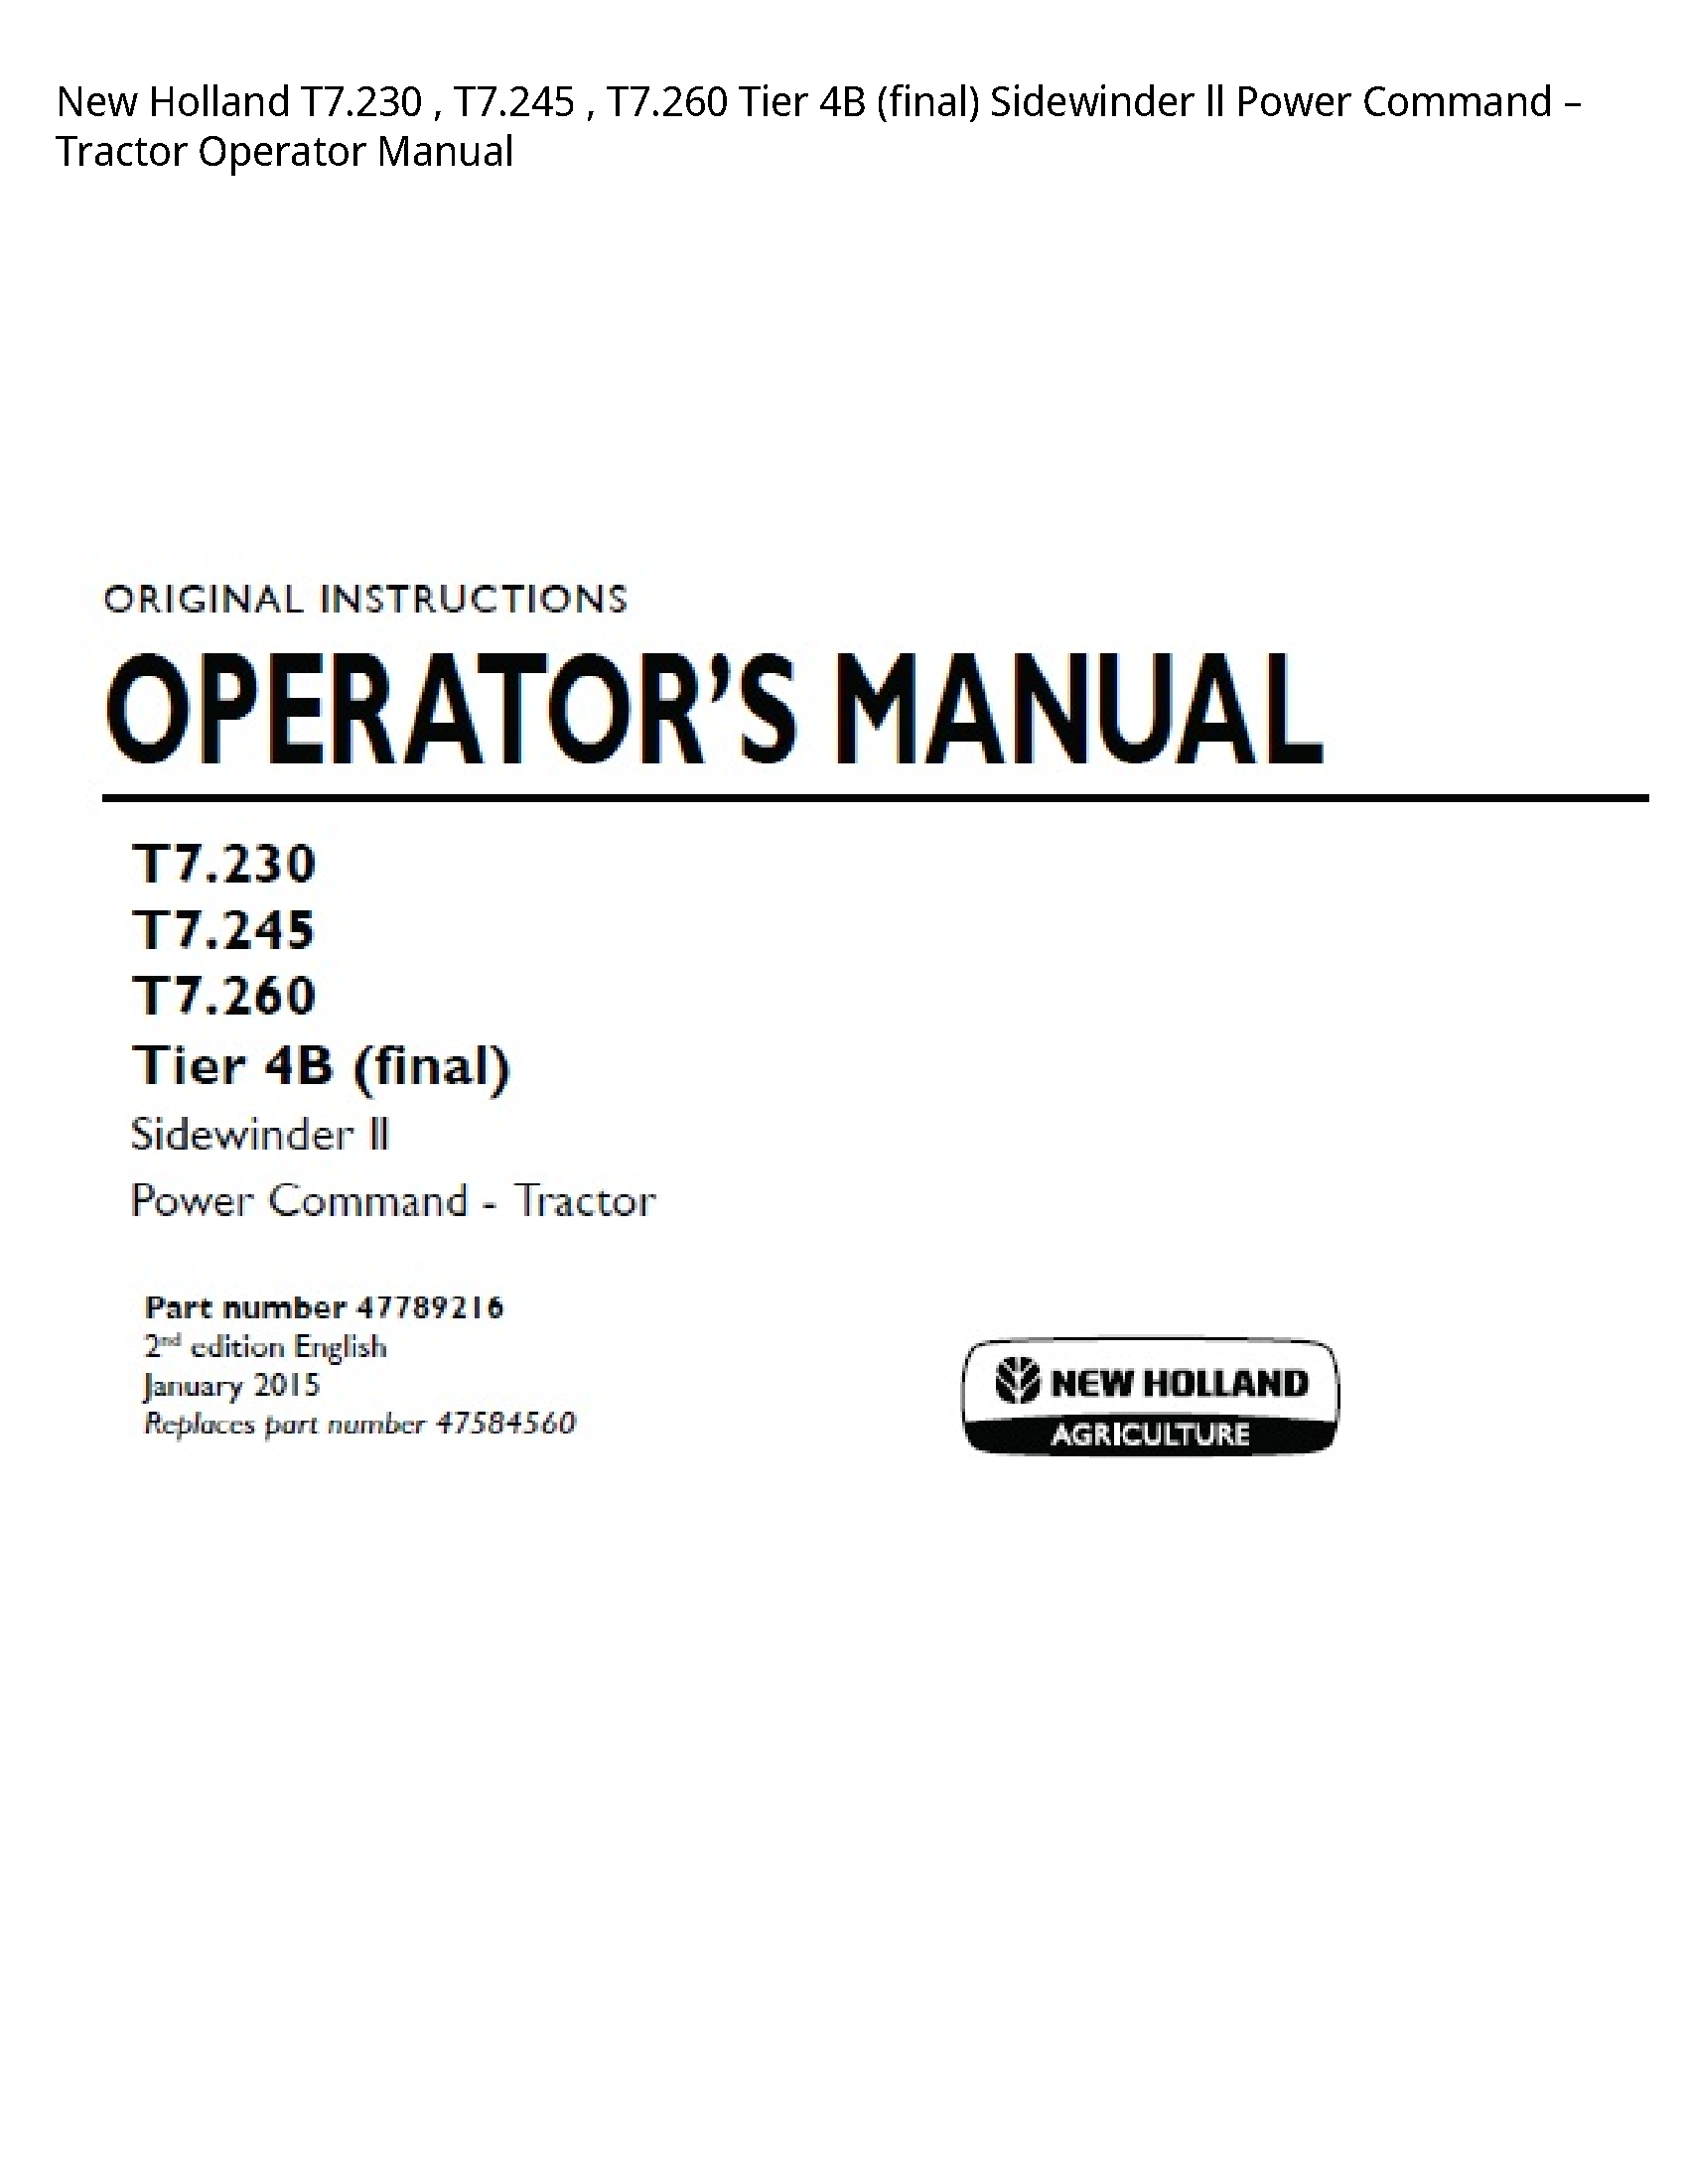 New Holland T7.230 Tier (final) Sidewinder ll Power Command Tractor Operator manual